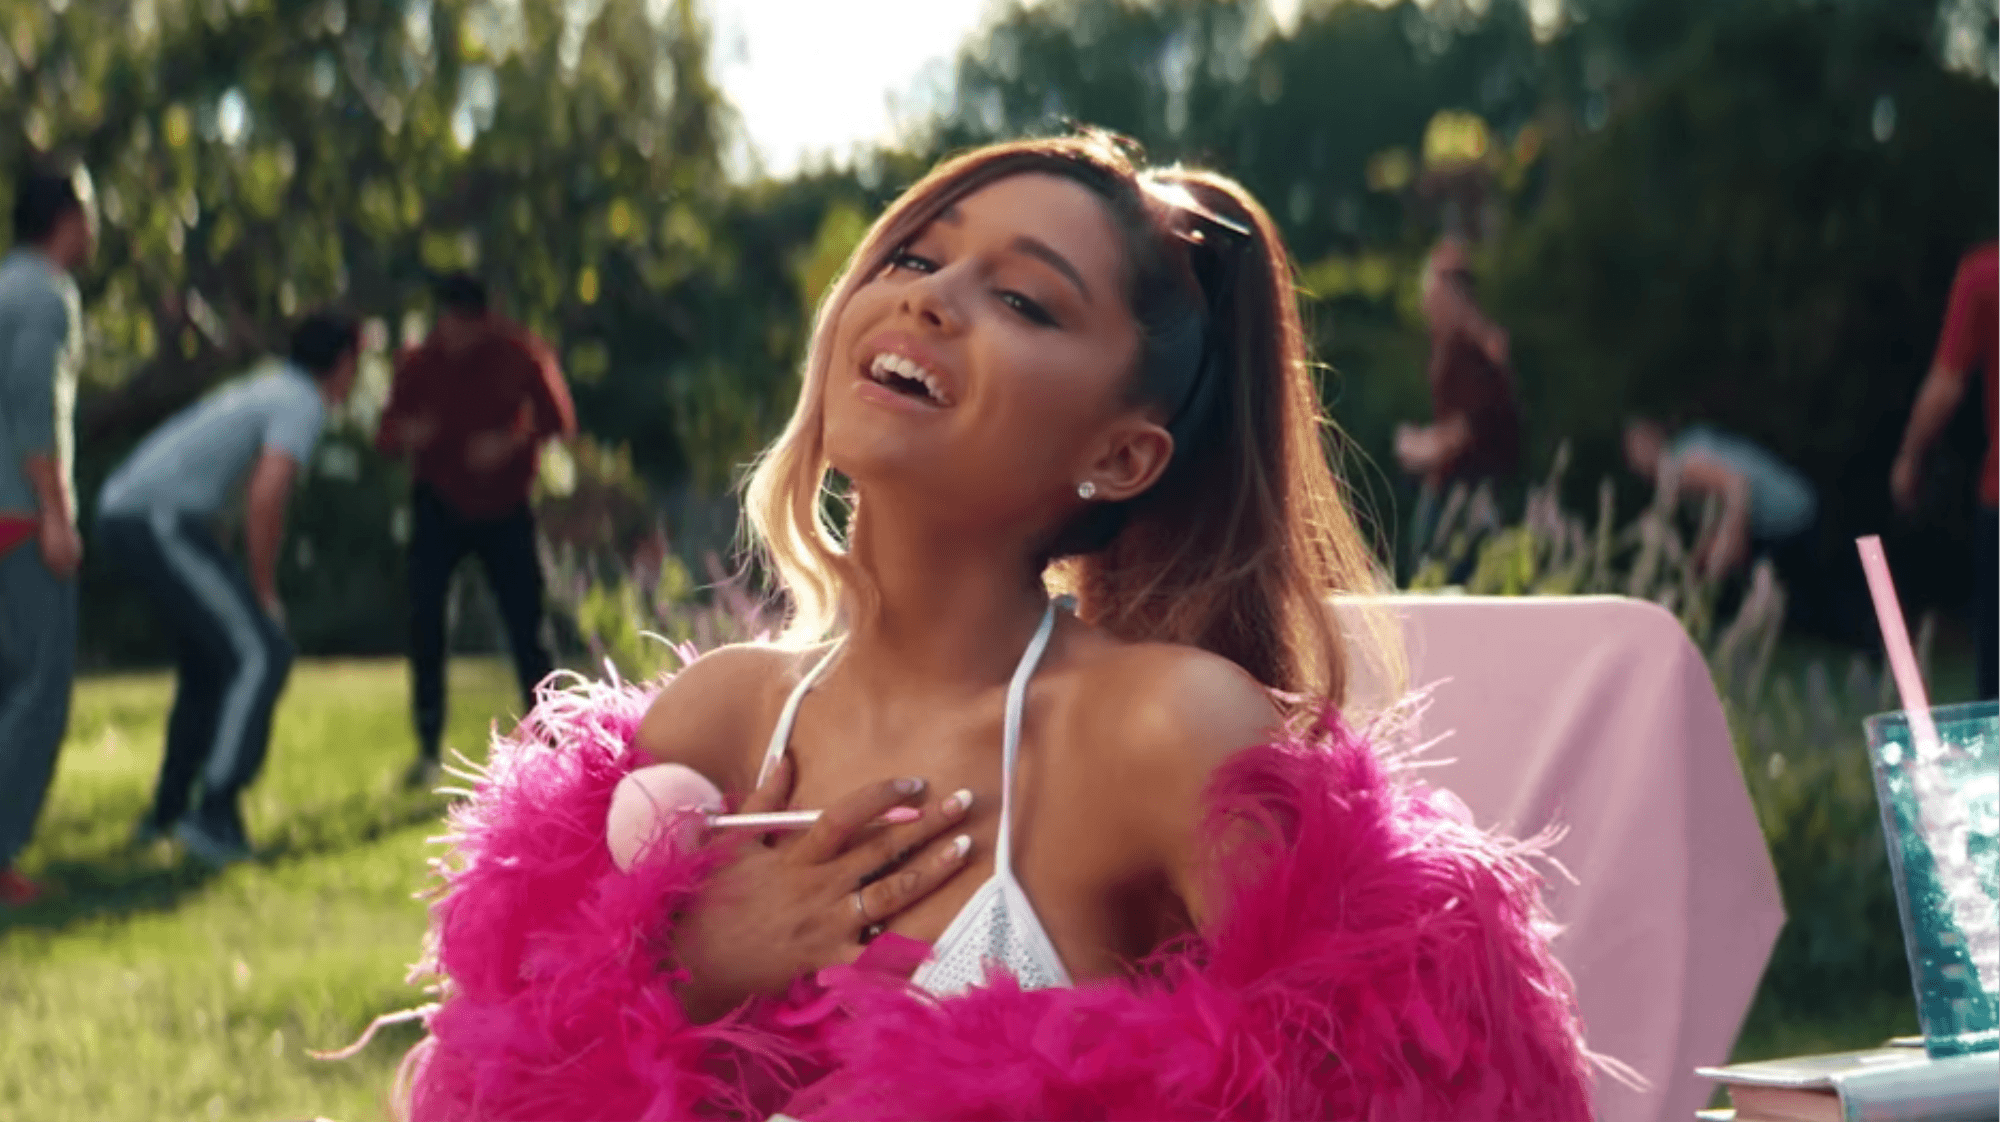 The 'Thank U, Next' Video Is About Living Your Best Life